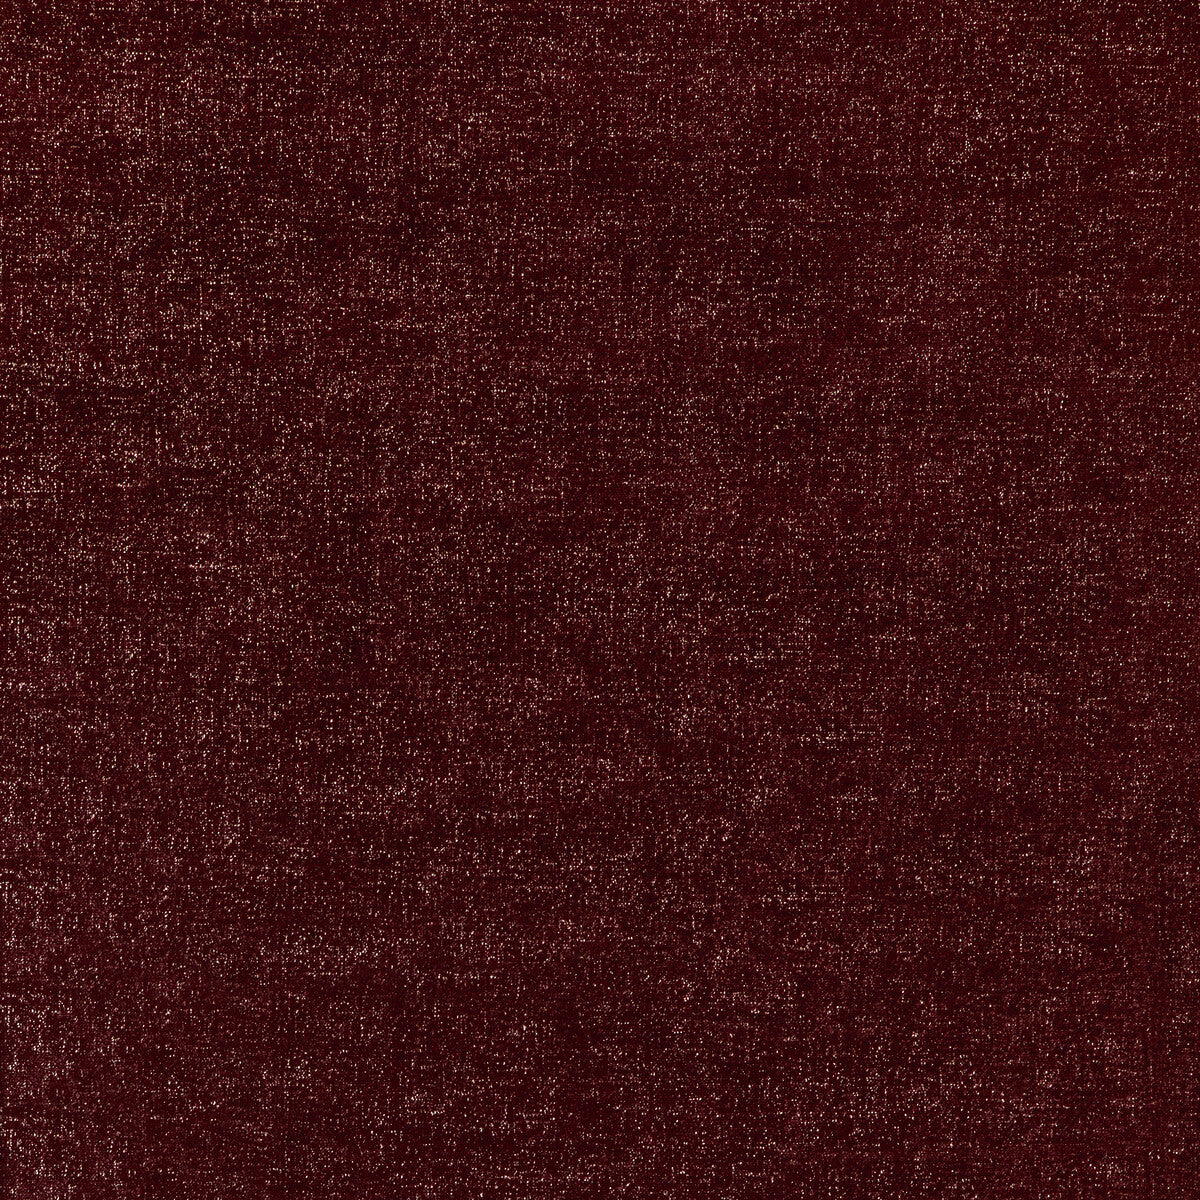 Night Fever fabric in sangria color - pattern 37281.77.0 - by Kravet Contract in the Happy Hour collection